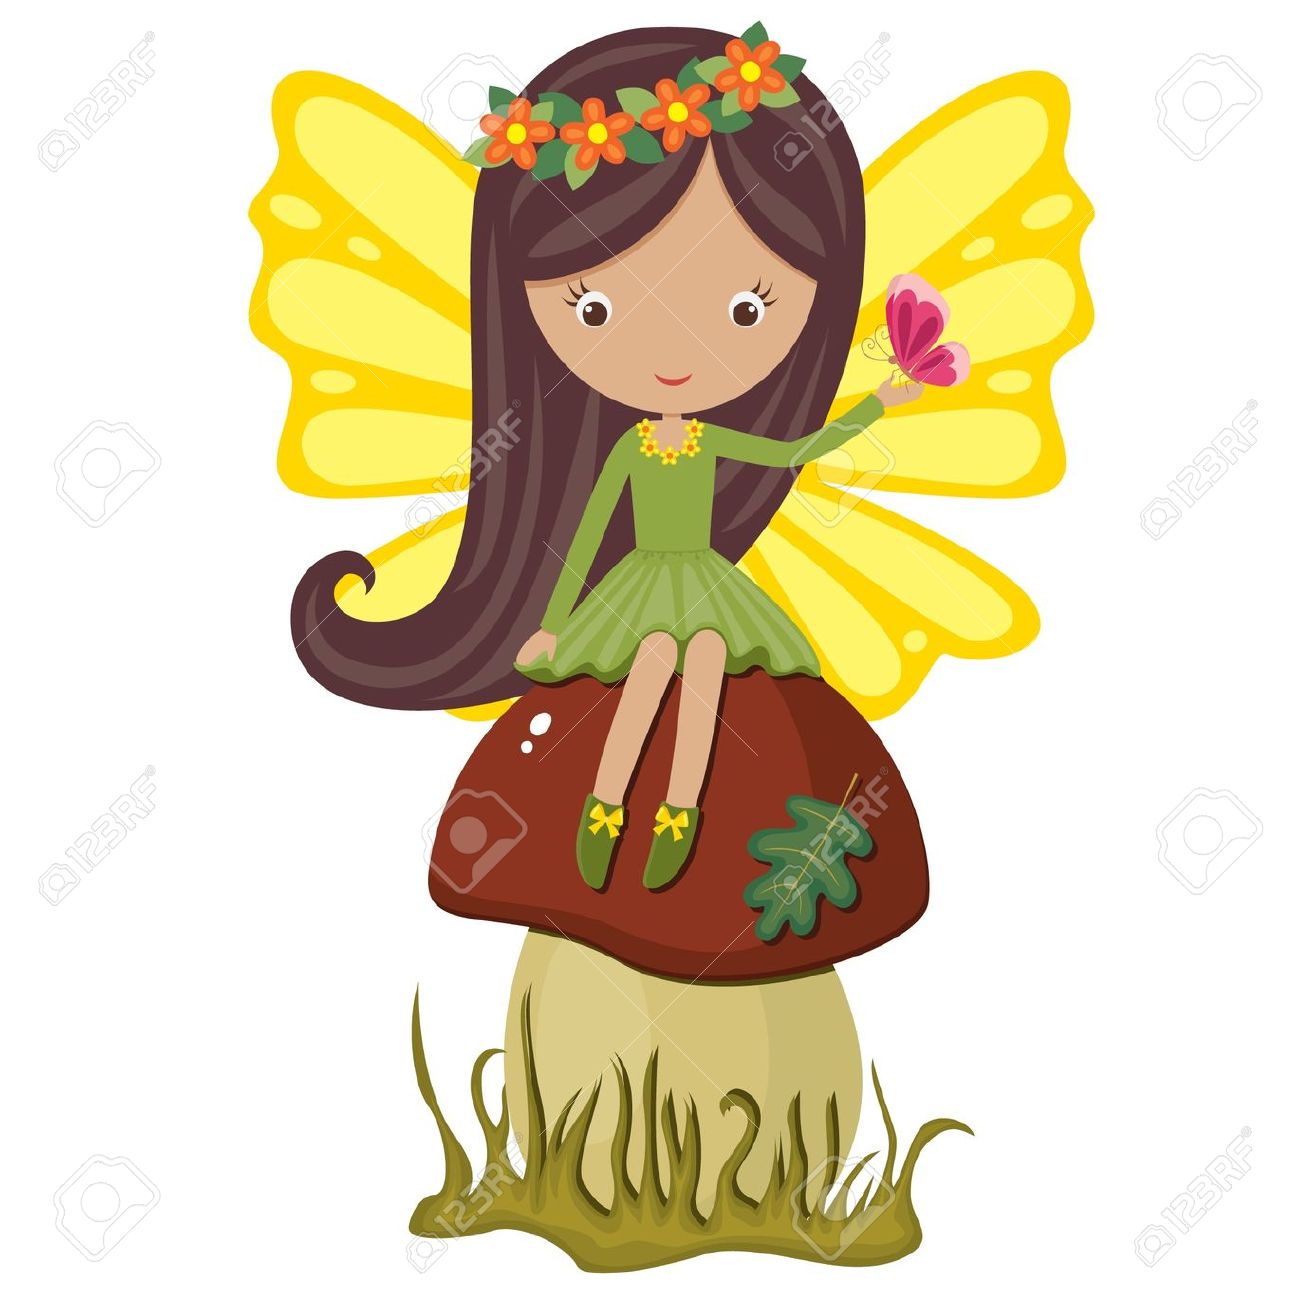 Elf Fairy clipart #15, Download drawings